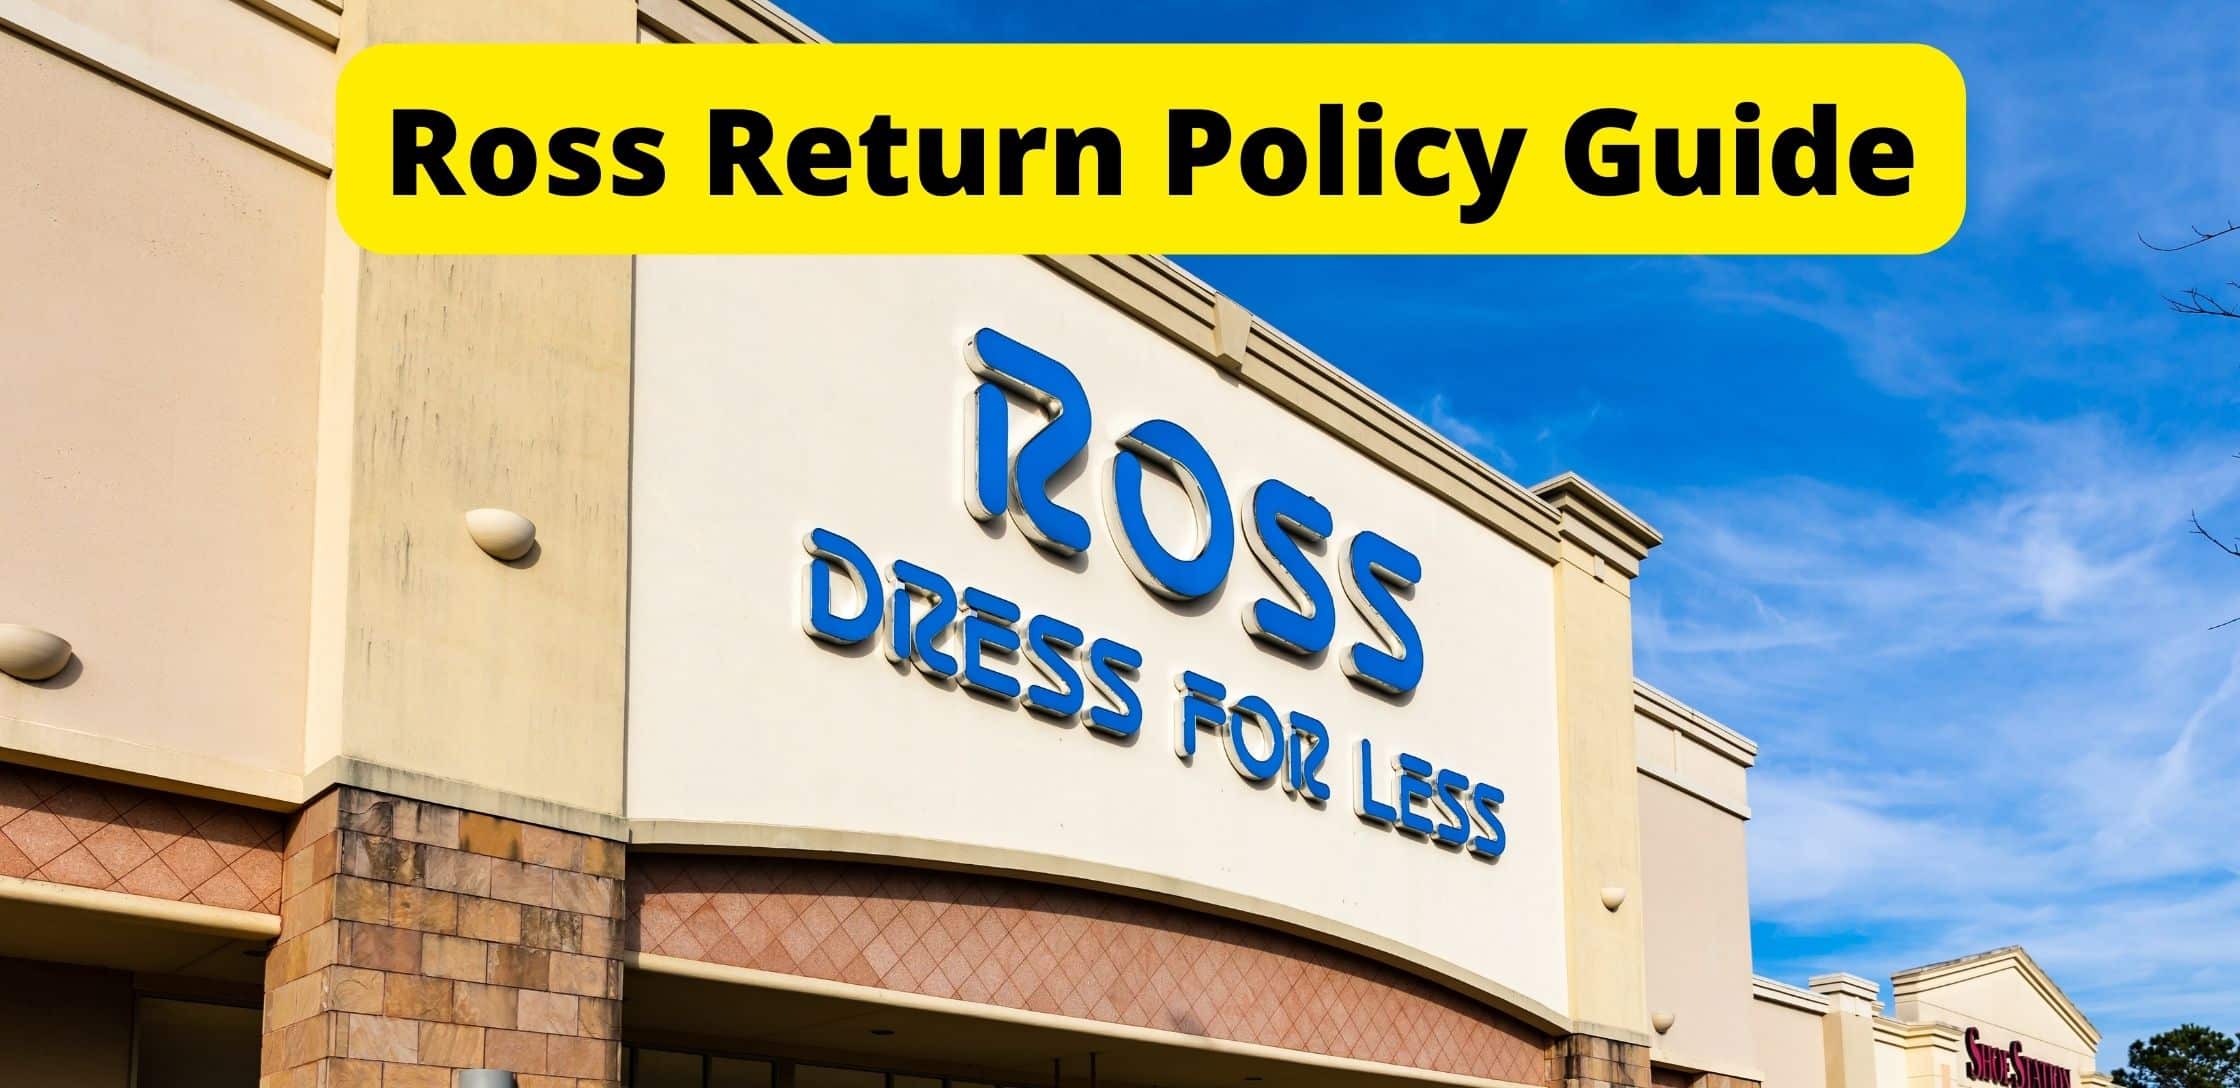 Ross Return Policy Guide